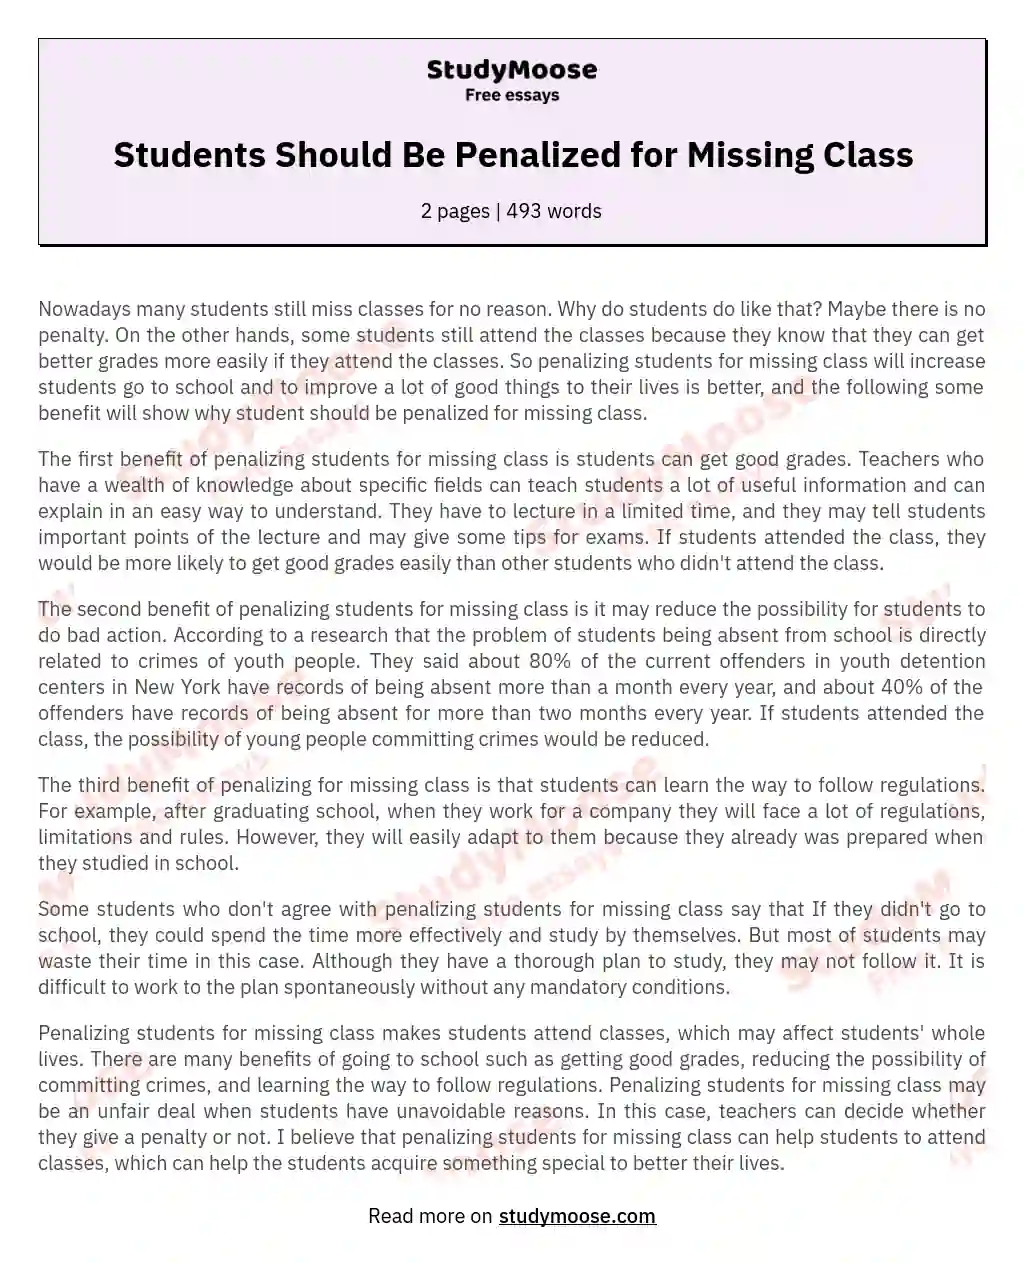 Students Should Be Penalized for Missing Class essay